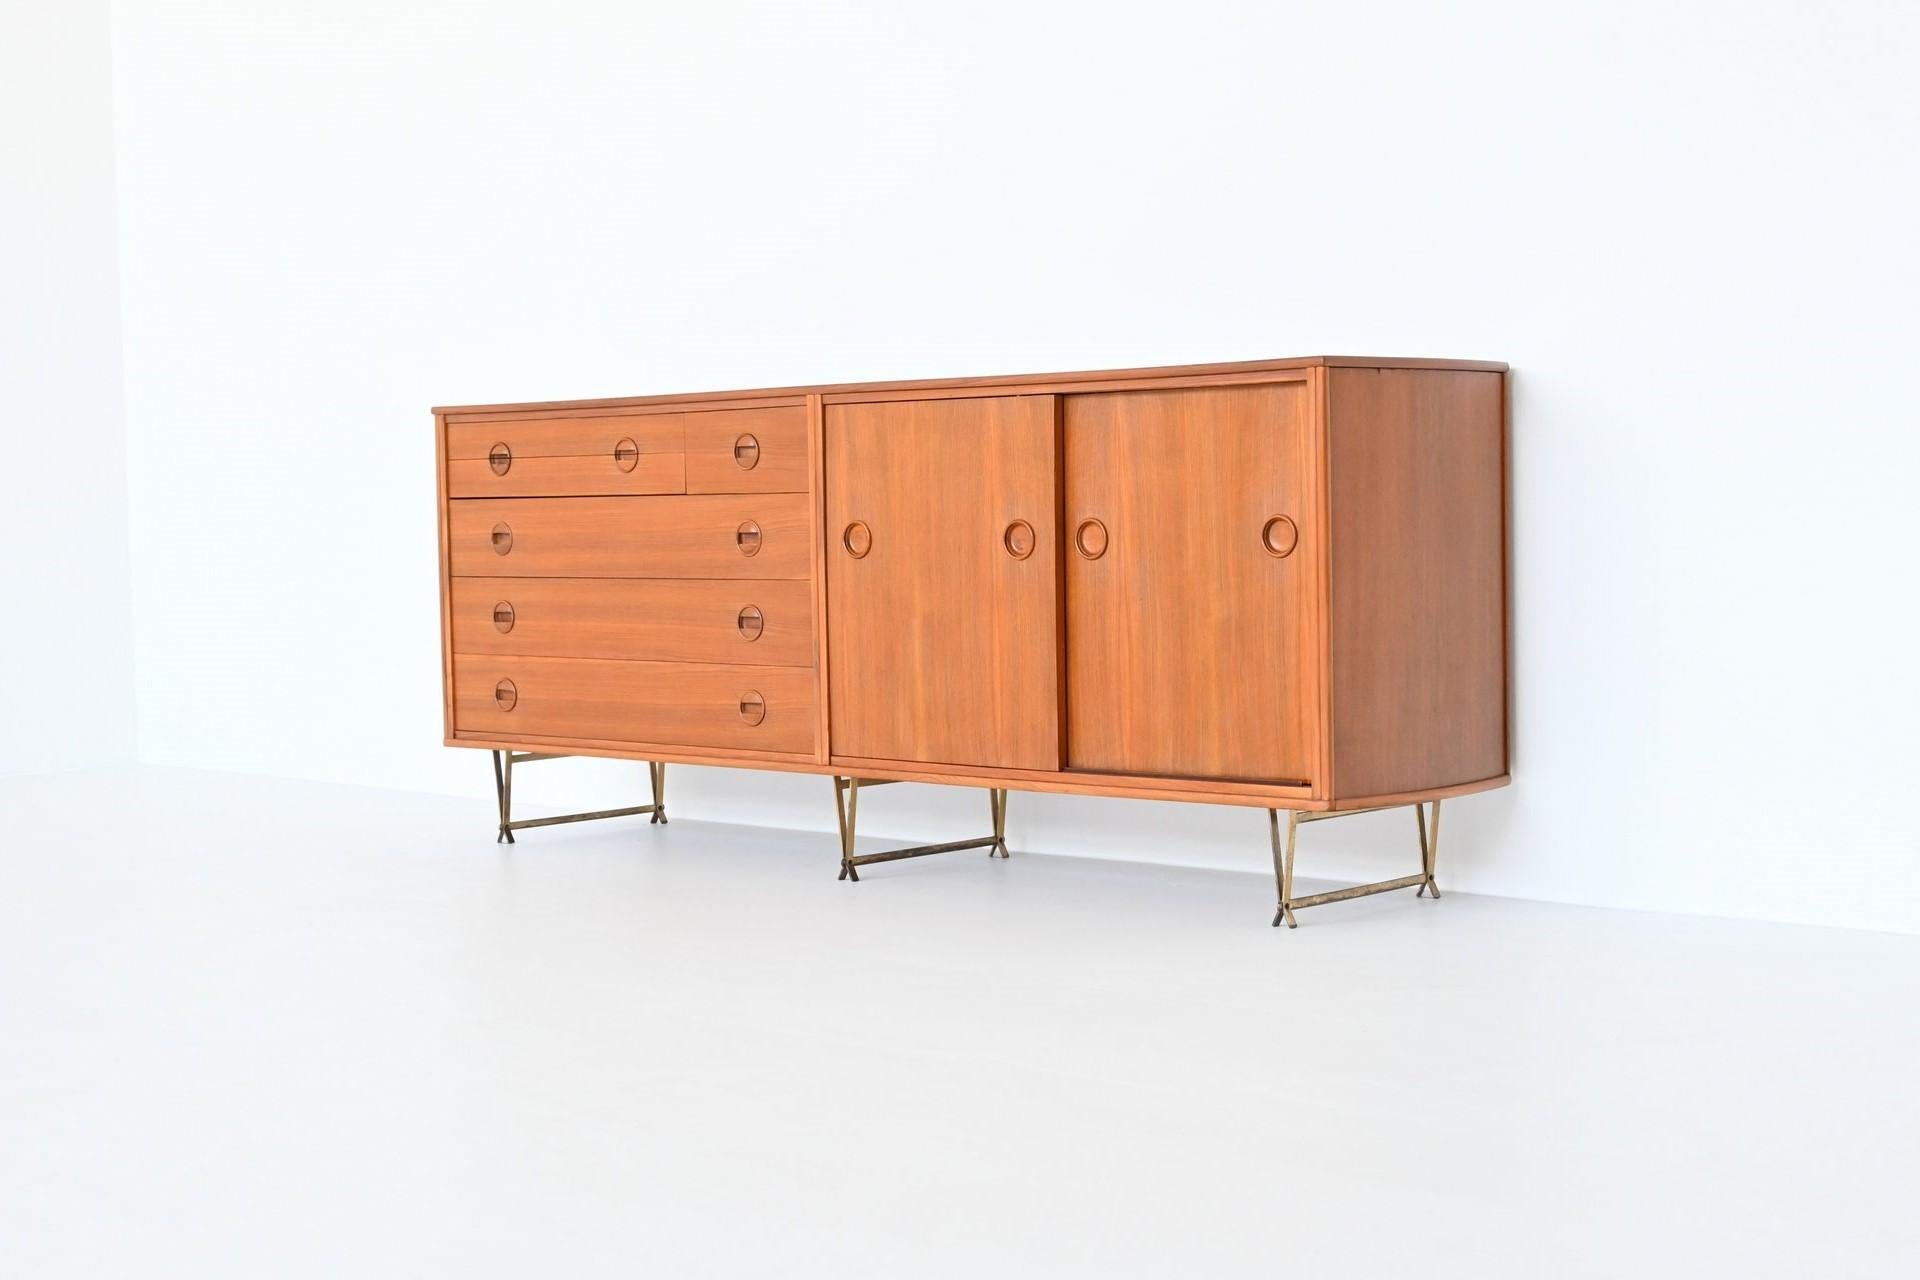 Stunning and rare sideboard designed by William Watting and manufactured by Fristho Franeker, The Netherlands 1954. This very nice shaped sideboard is made of veneered walnut wood with brass legs. On the right it has two sliding doors with shelves